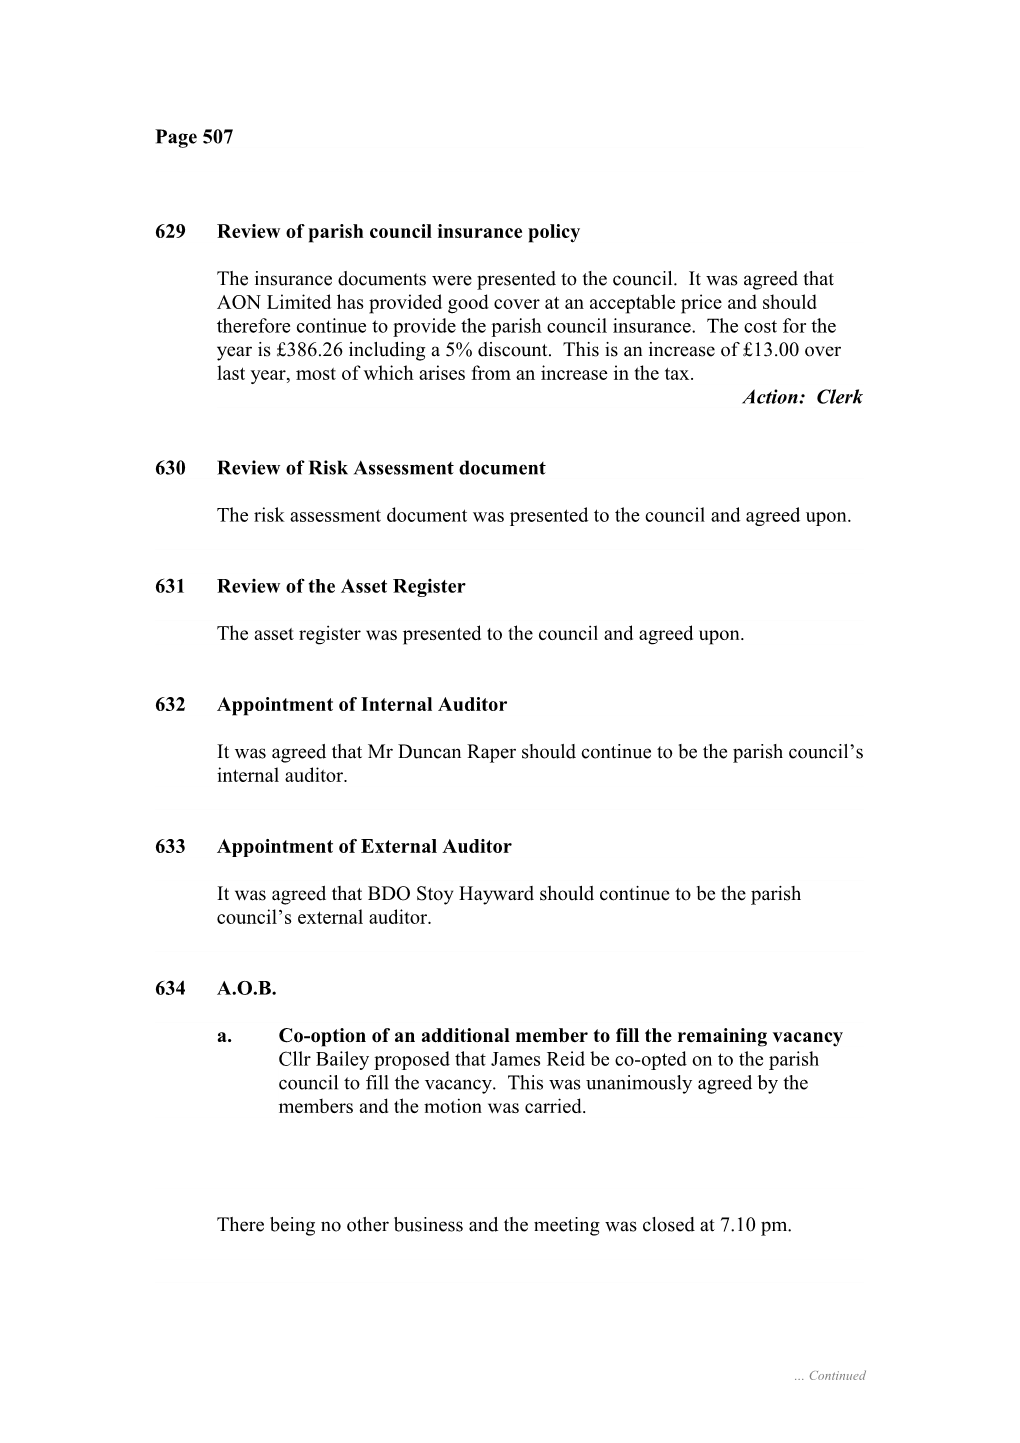 Minutes of the Annual Meeting of Hanwell Parish Council